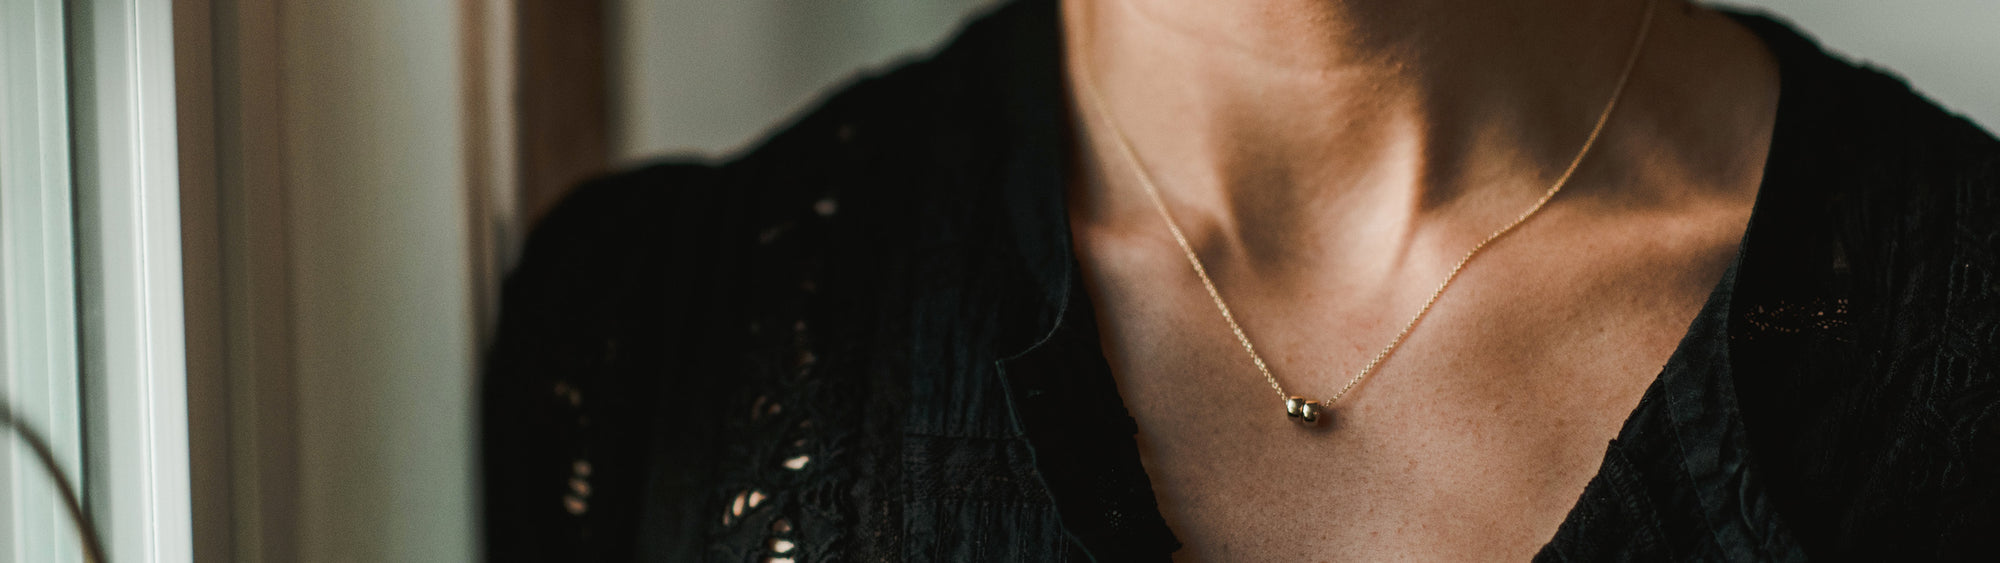 Close-up of a person wearing a delicate gold necklace with a small pendant, focusing on the necklace and the neckline of a black lace outfit.